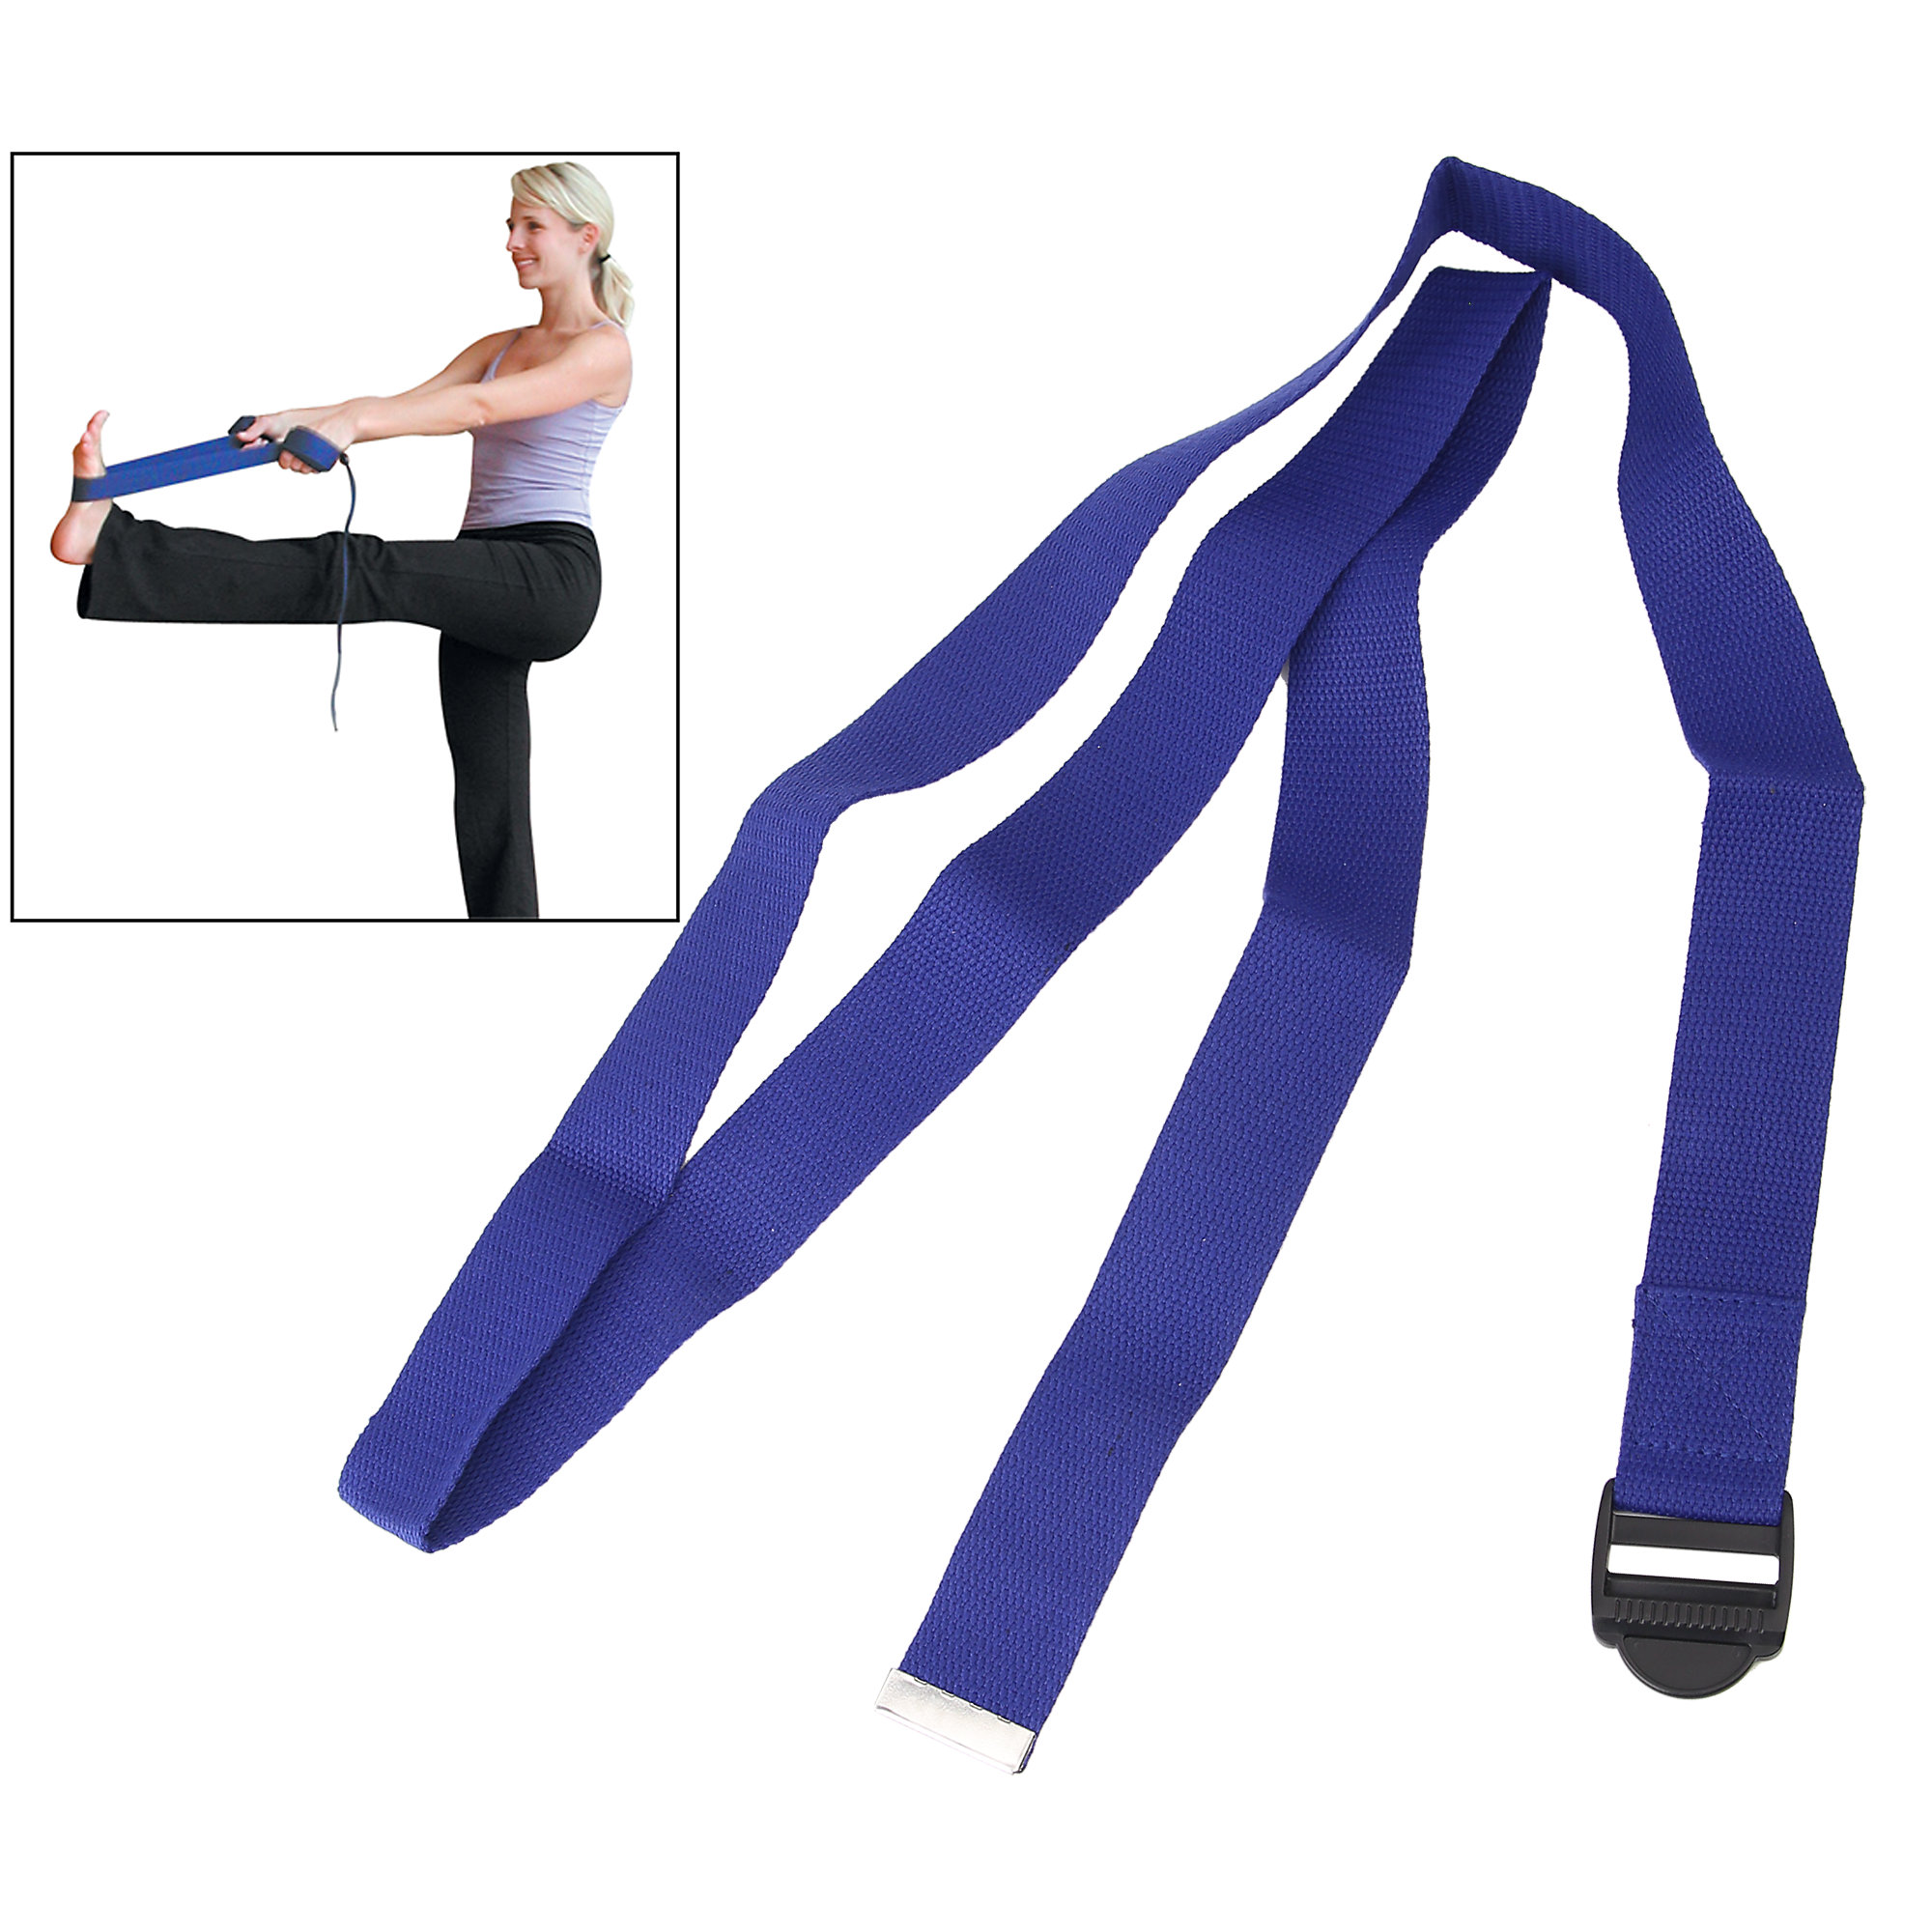 Yoga Strap, 6', Navy Blue with Cinch